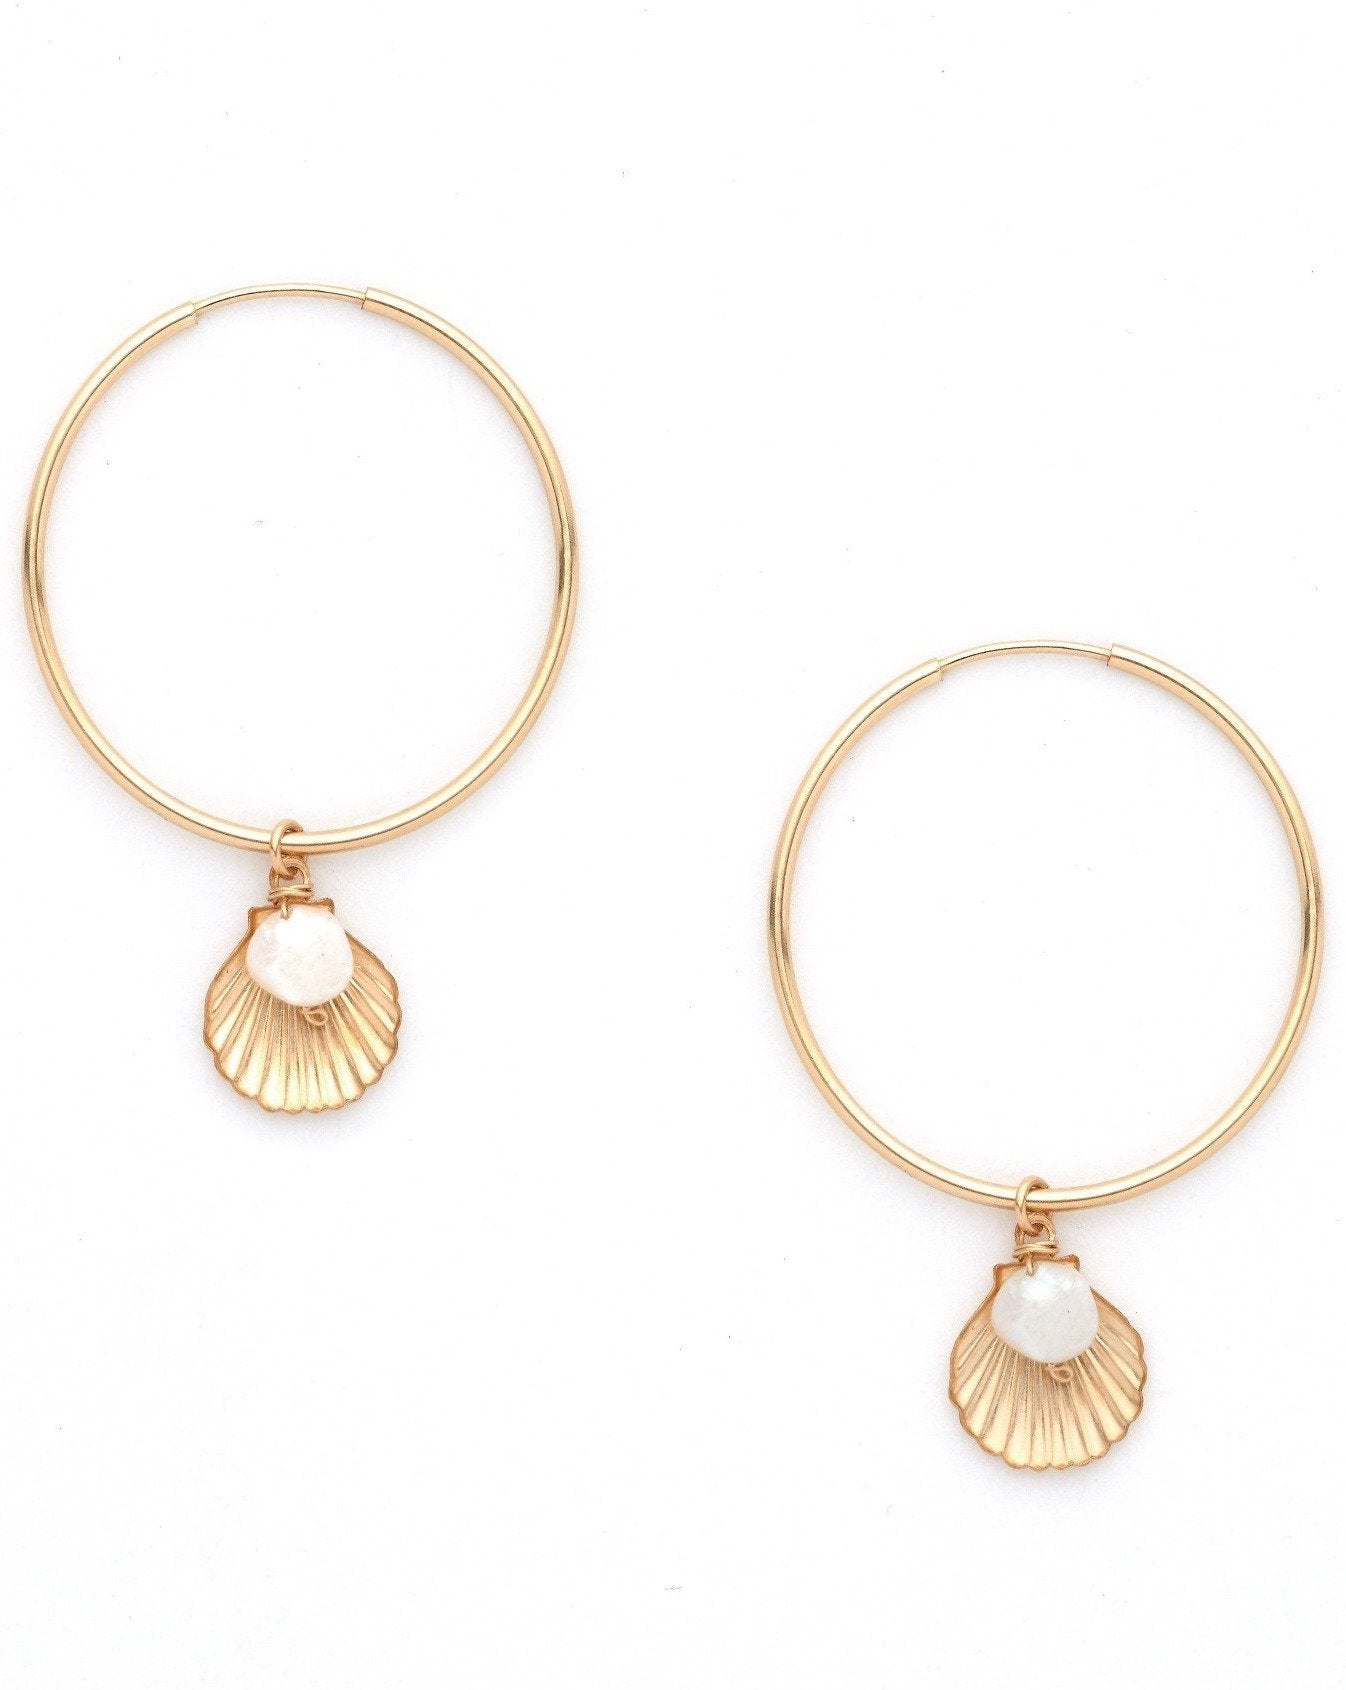 Belle Hoop Earrings by KOZAKH. A 30mm hoop earrings in 14K Gold Filled, featuring a 5mm flat irregular Pearl and a Shell charm.